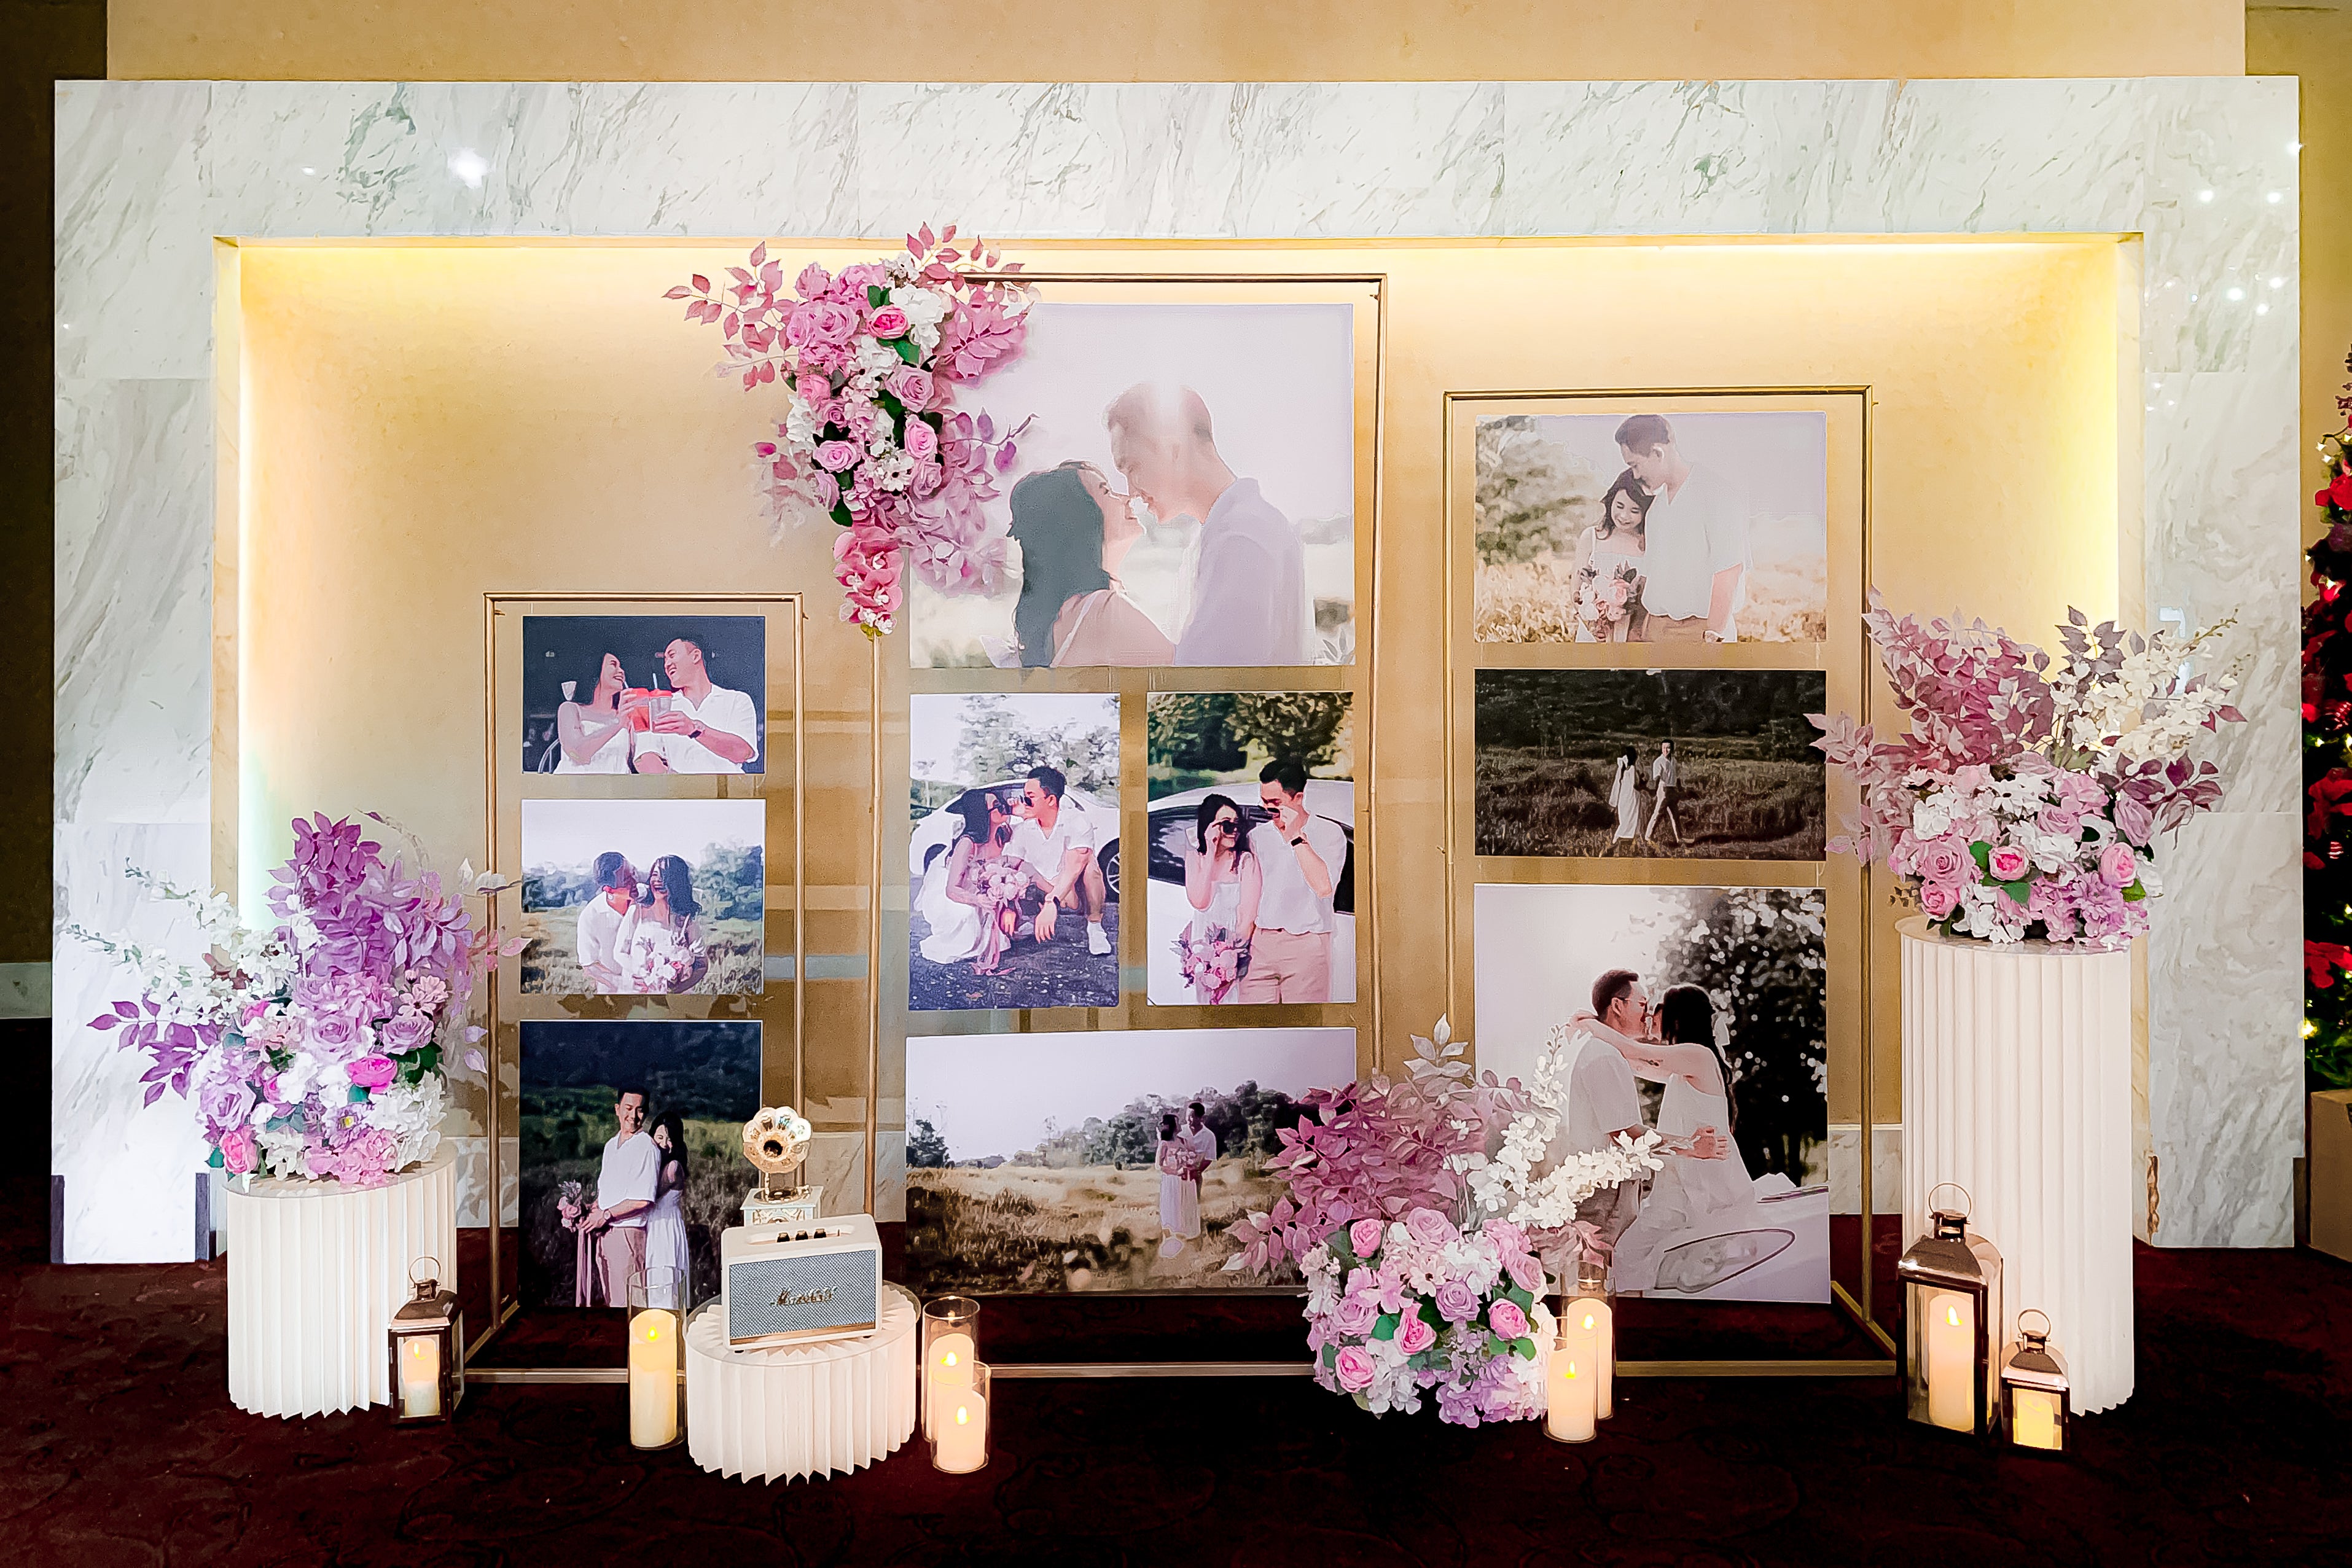 Wedding Reception Decor in Singapore - Multi-stands Photo Gallery with Purple/Lilac White Florals (Venue: Hotel Fort Canning)